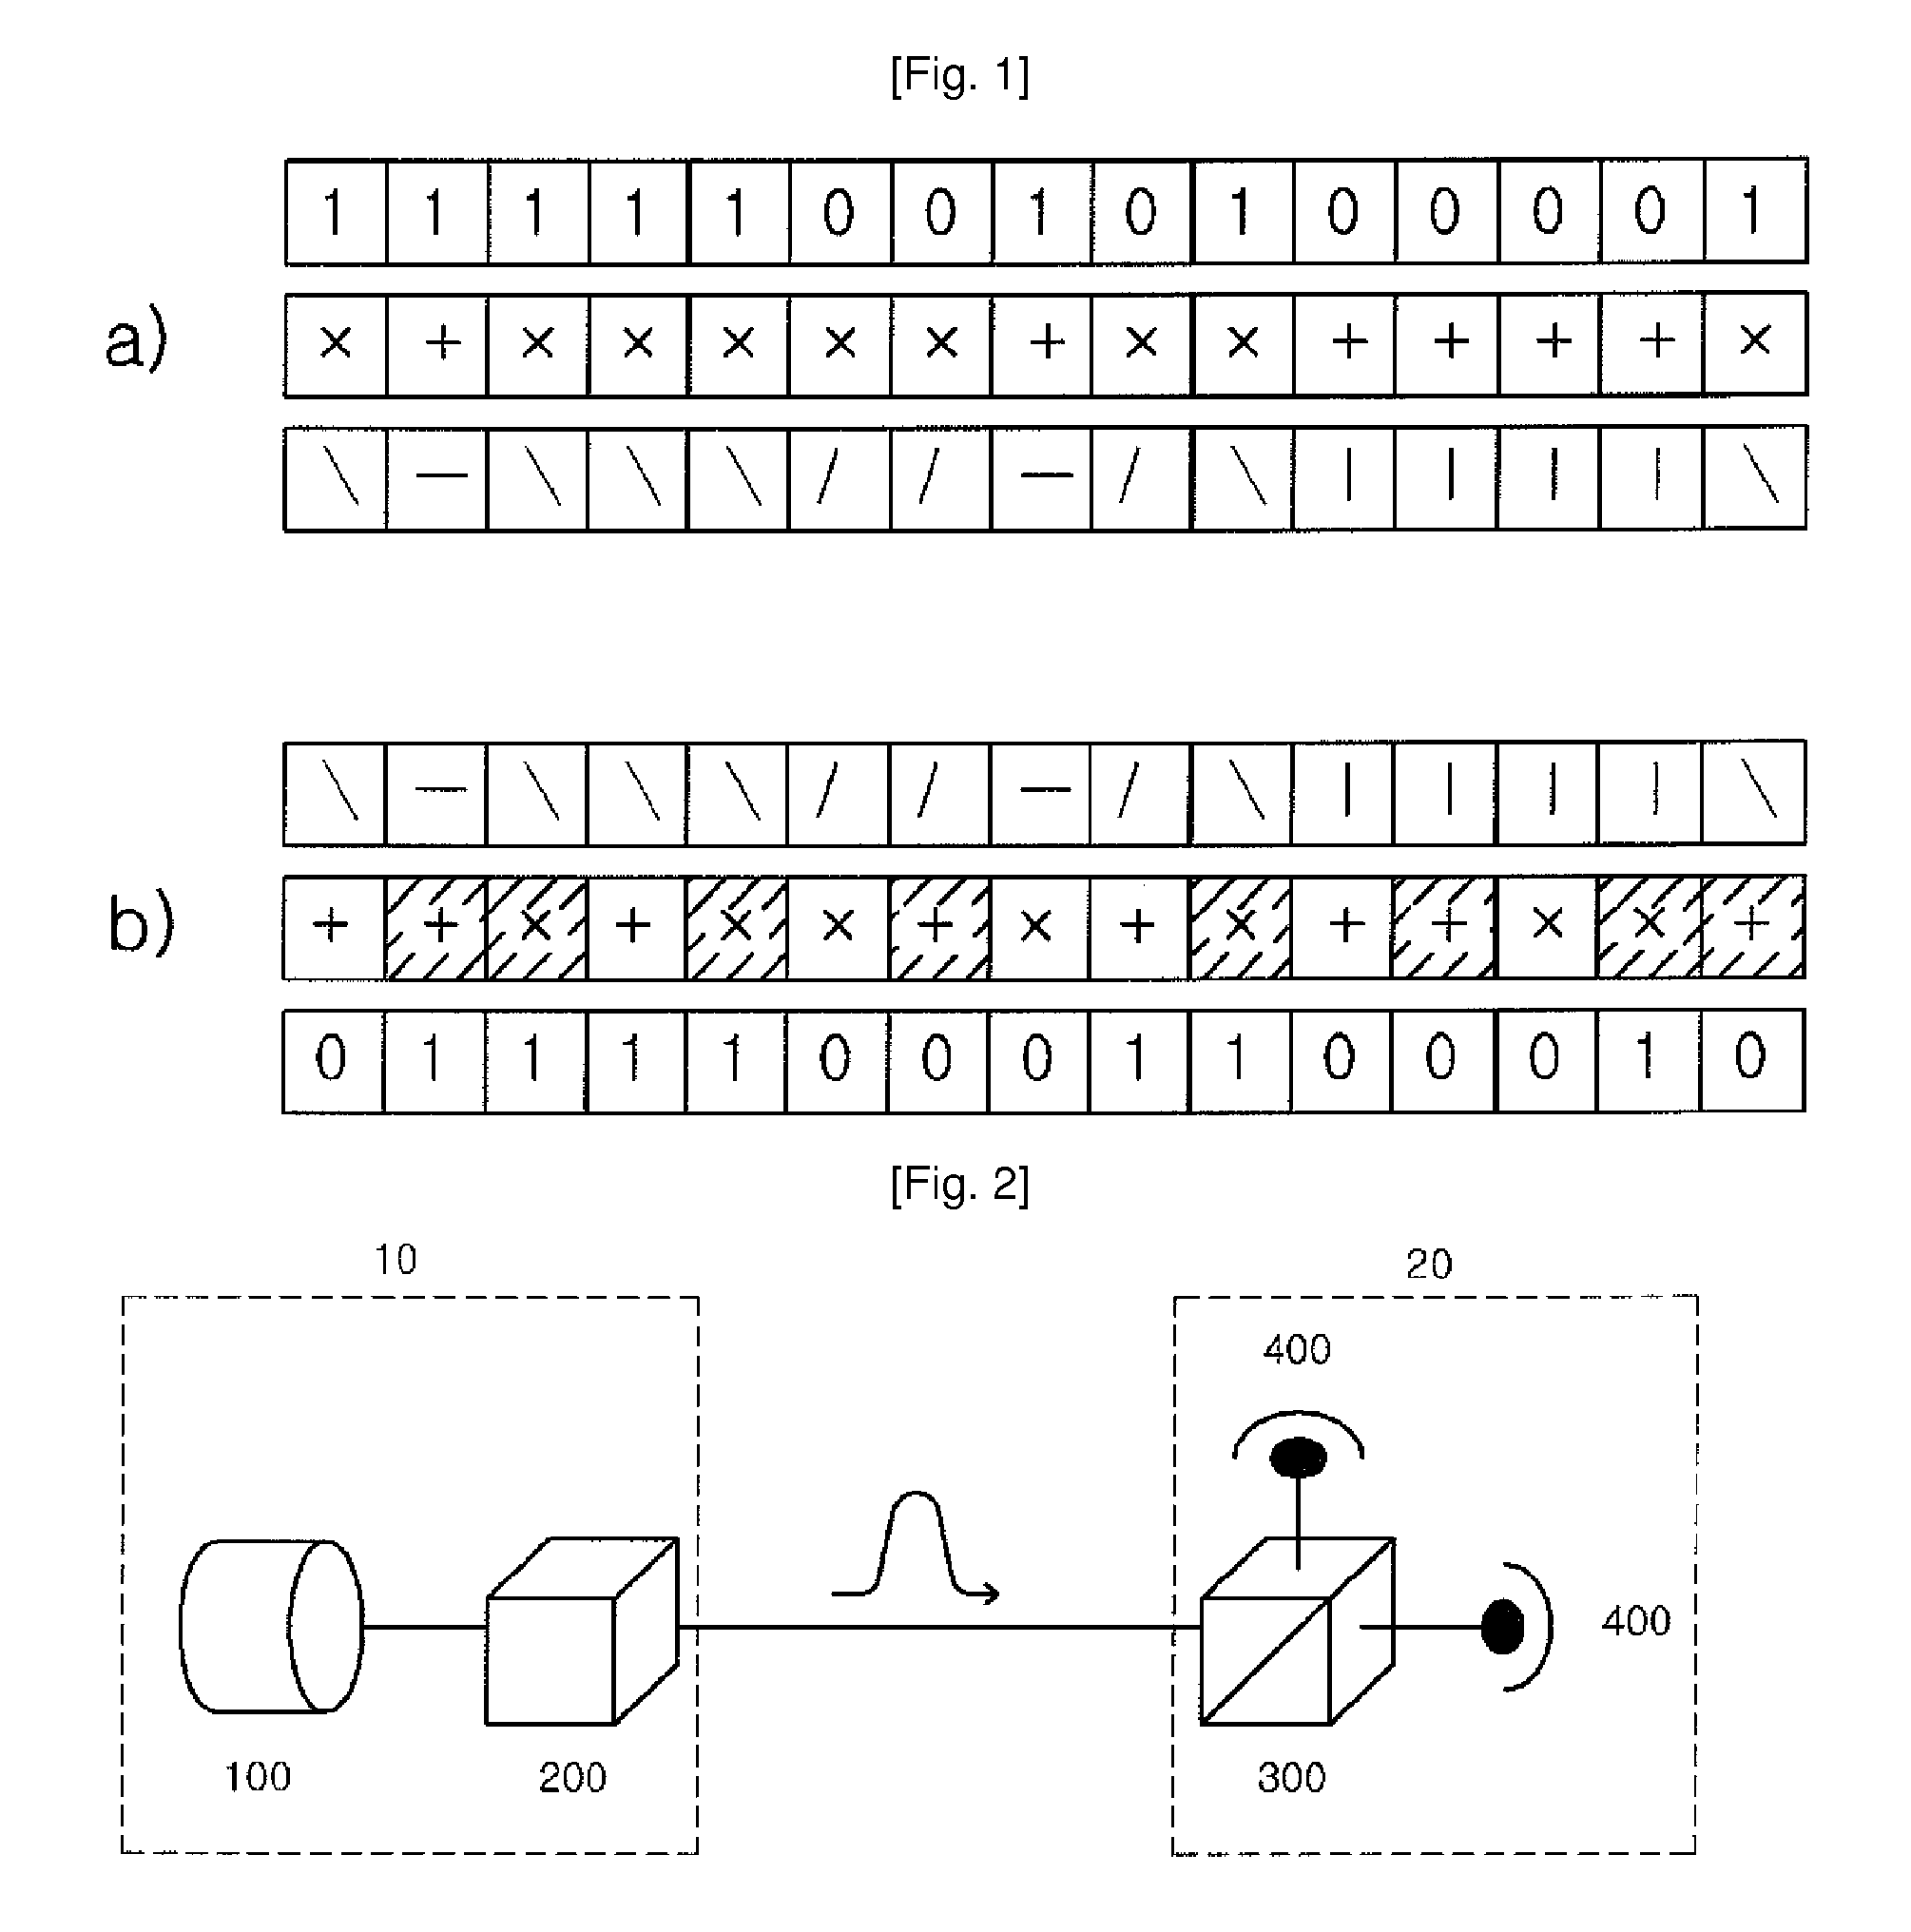 Method of quantum cryptography using blind photon polarization quibits with multiple stages